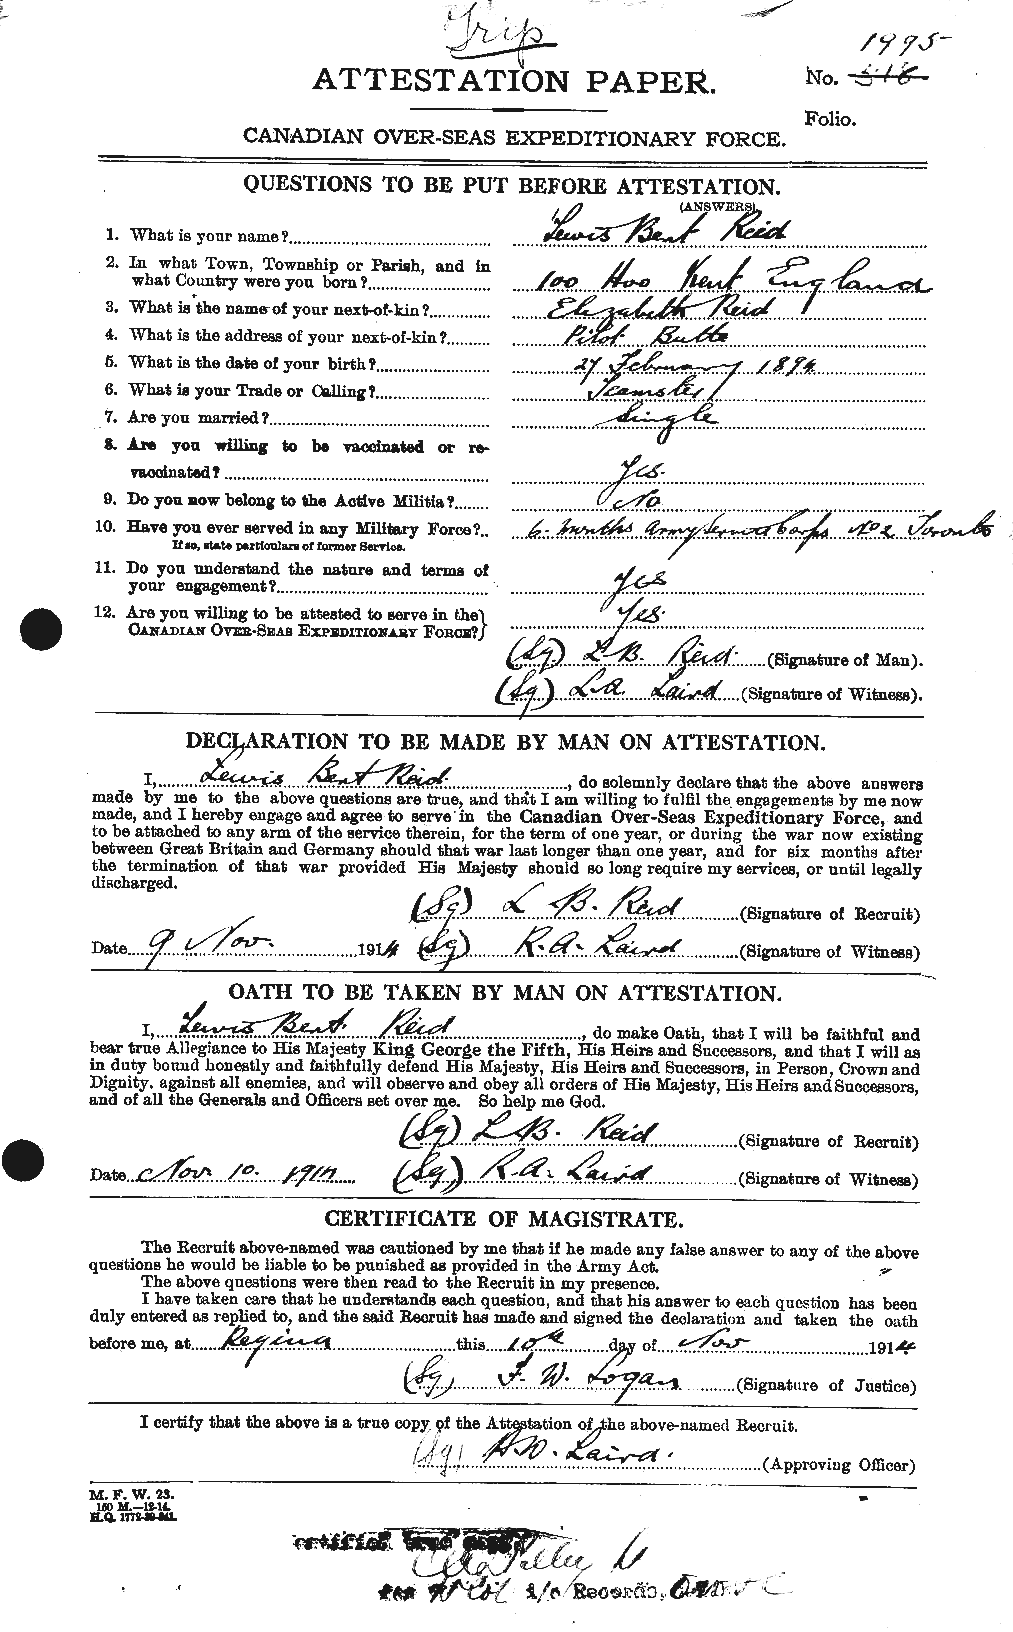 Personnel Records of the First World War - CEF 598923a